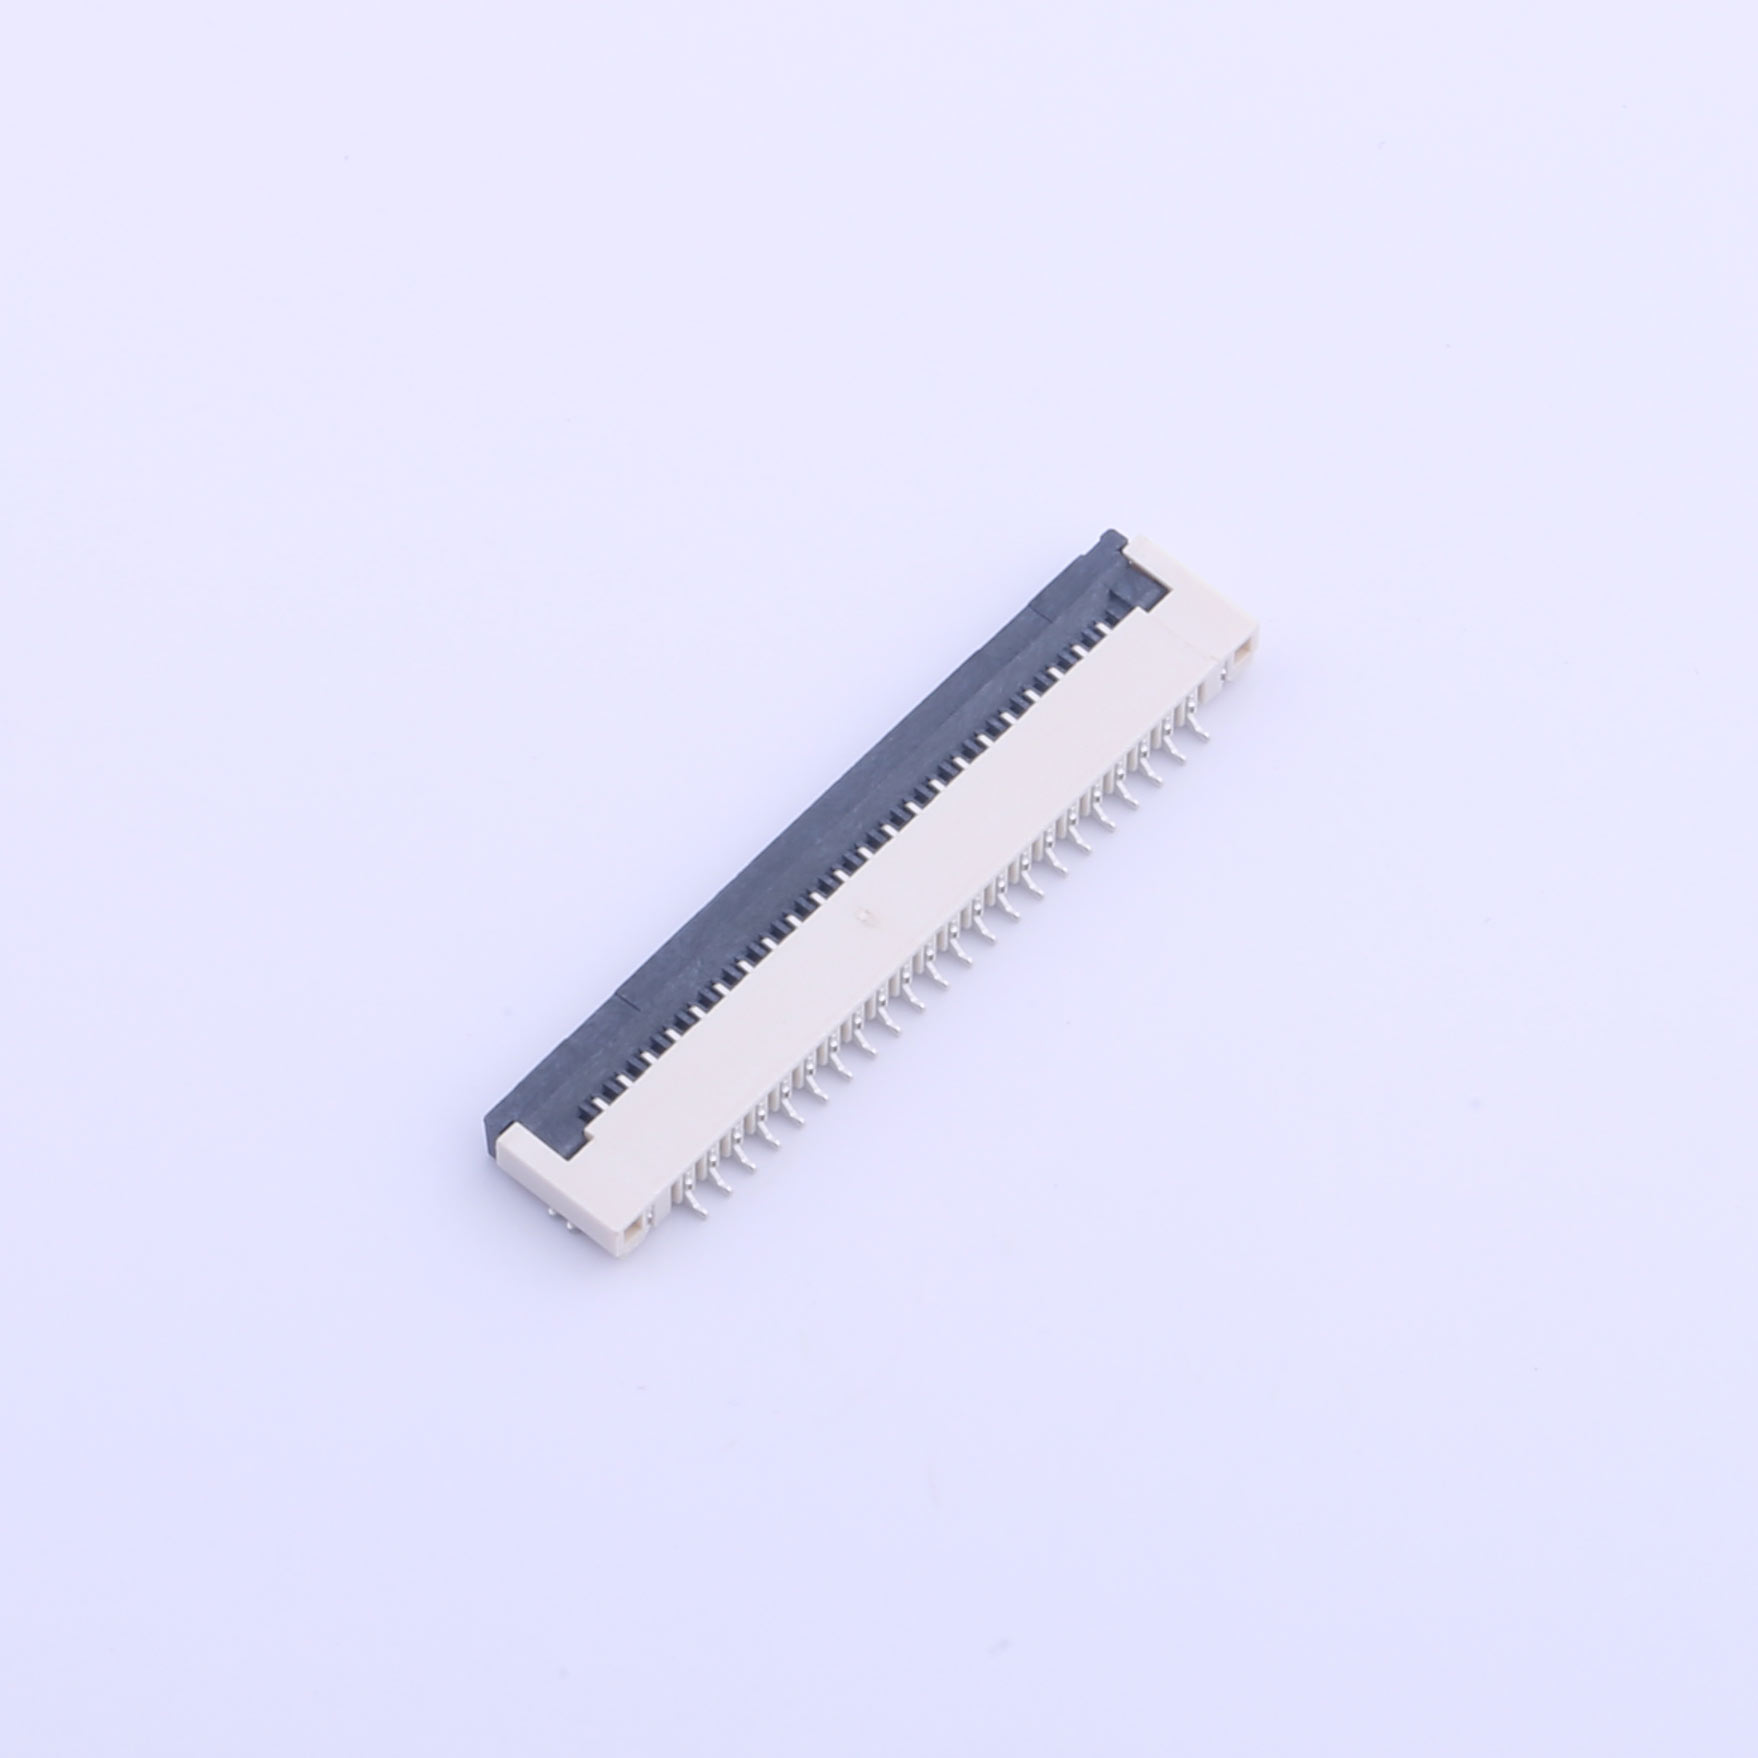 Kinghelm Pitch 1mm FFC/FPC Connector  22p - KH-FG1.0-H2.0-22pin